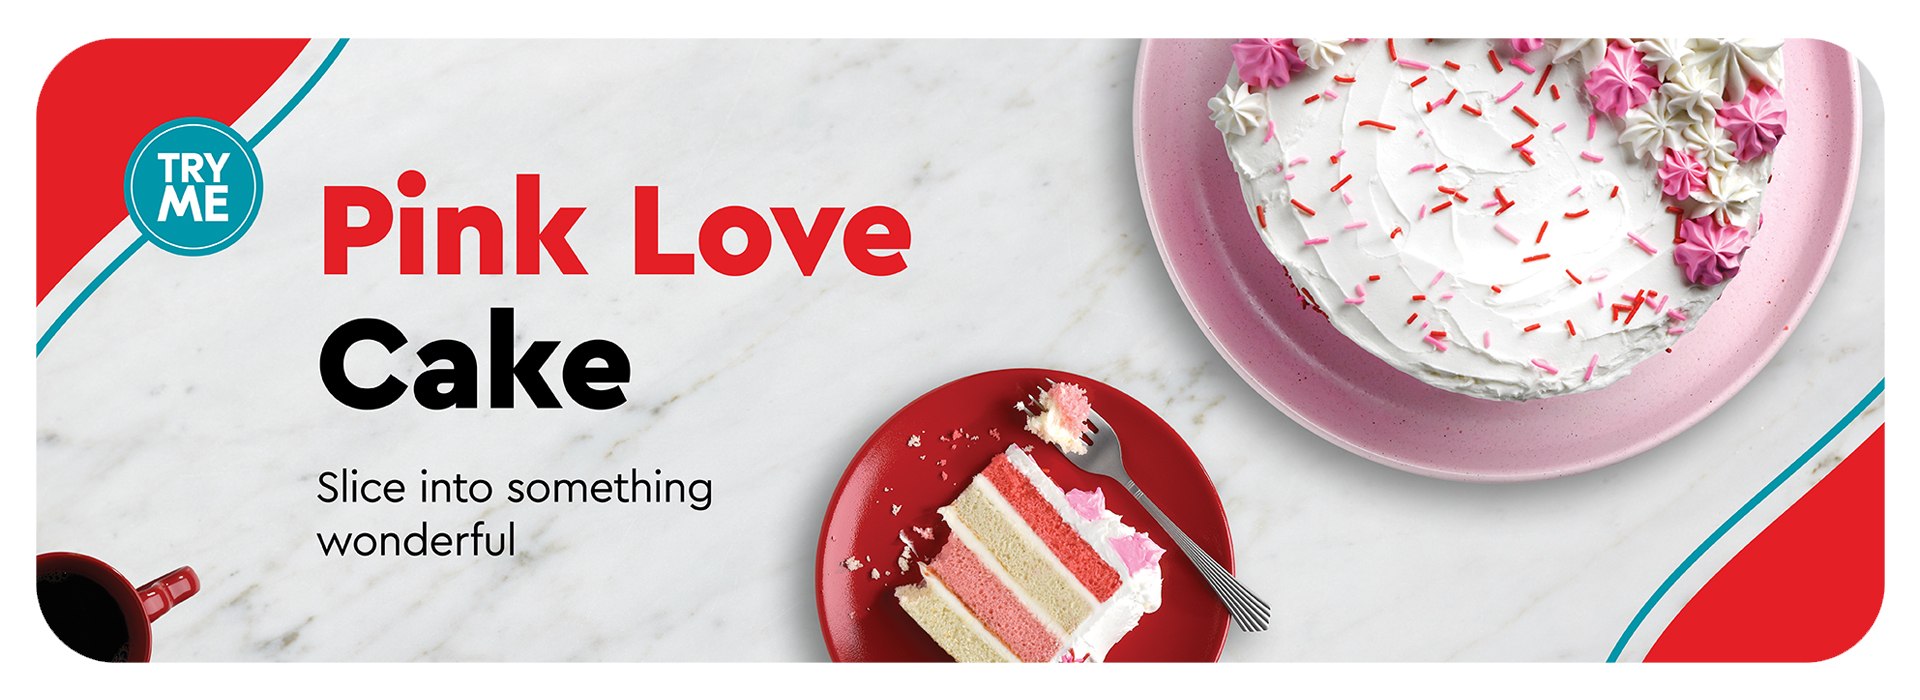 Text Reading 'Pink Love Cake with a picture of an uncut cake and a cake slice having red, yellow, and pink bread and white cream saying ‘Try Me’ and ‘Slice into something wonderful’.